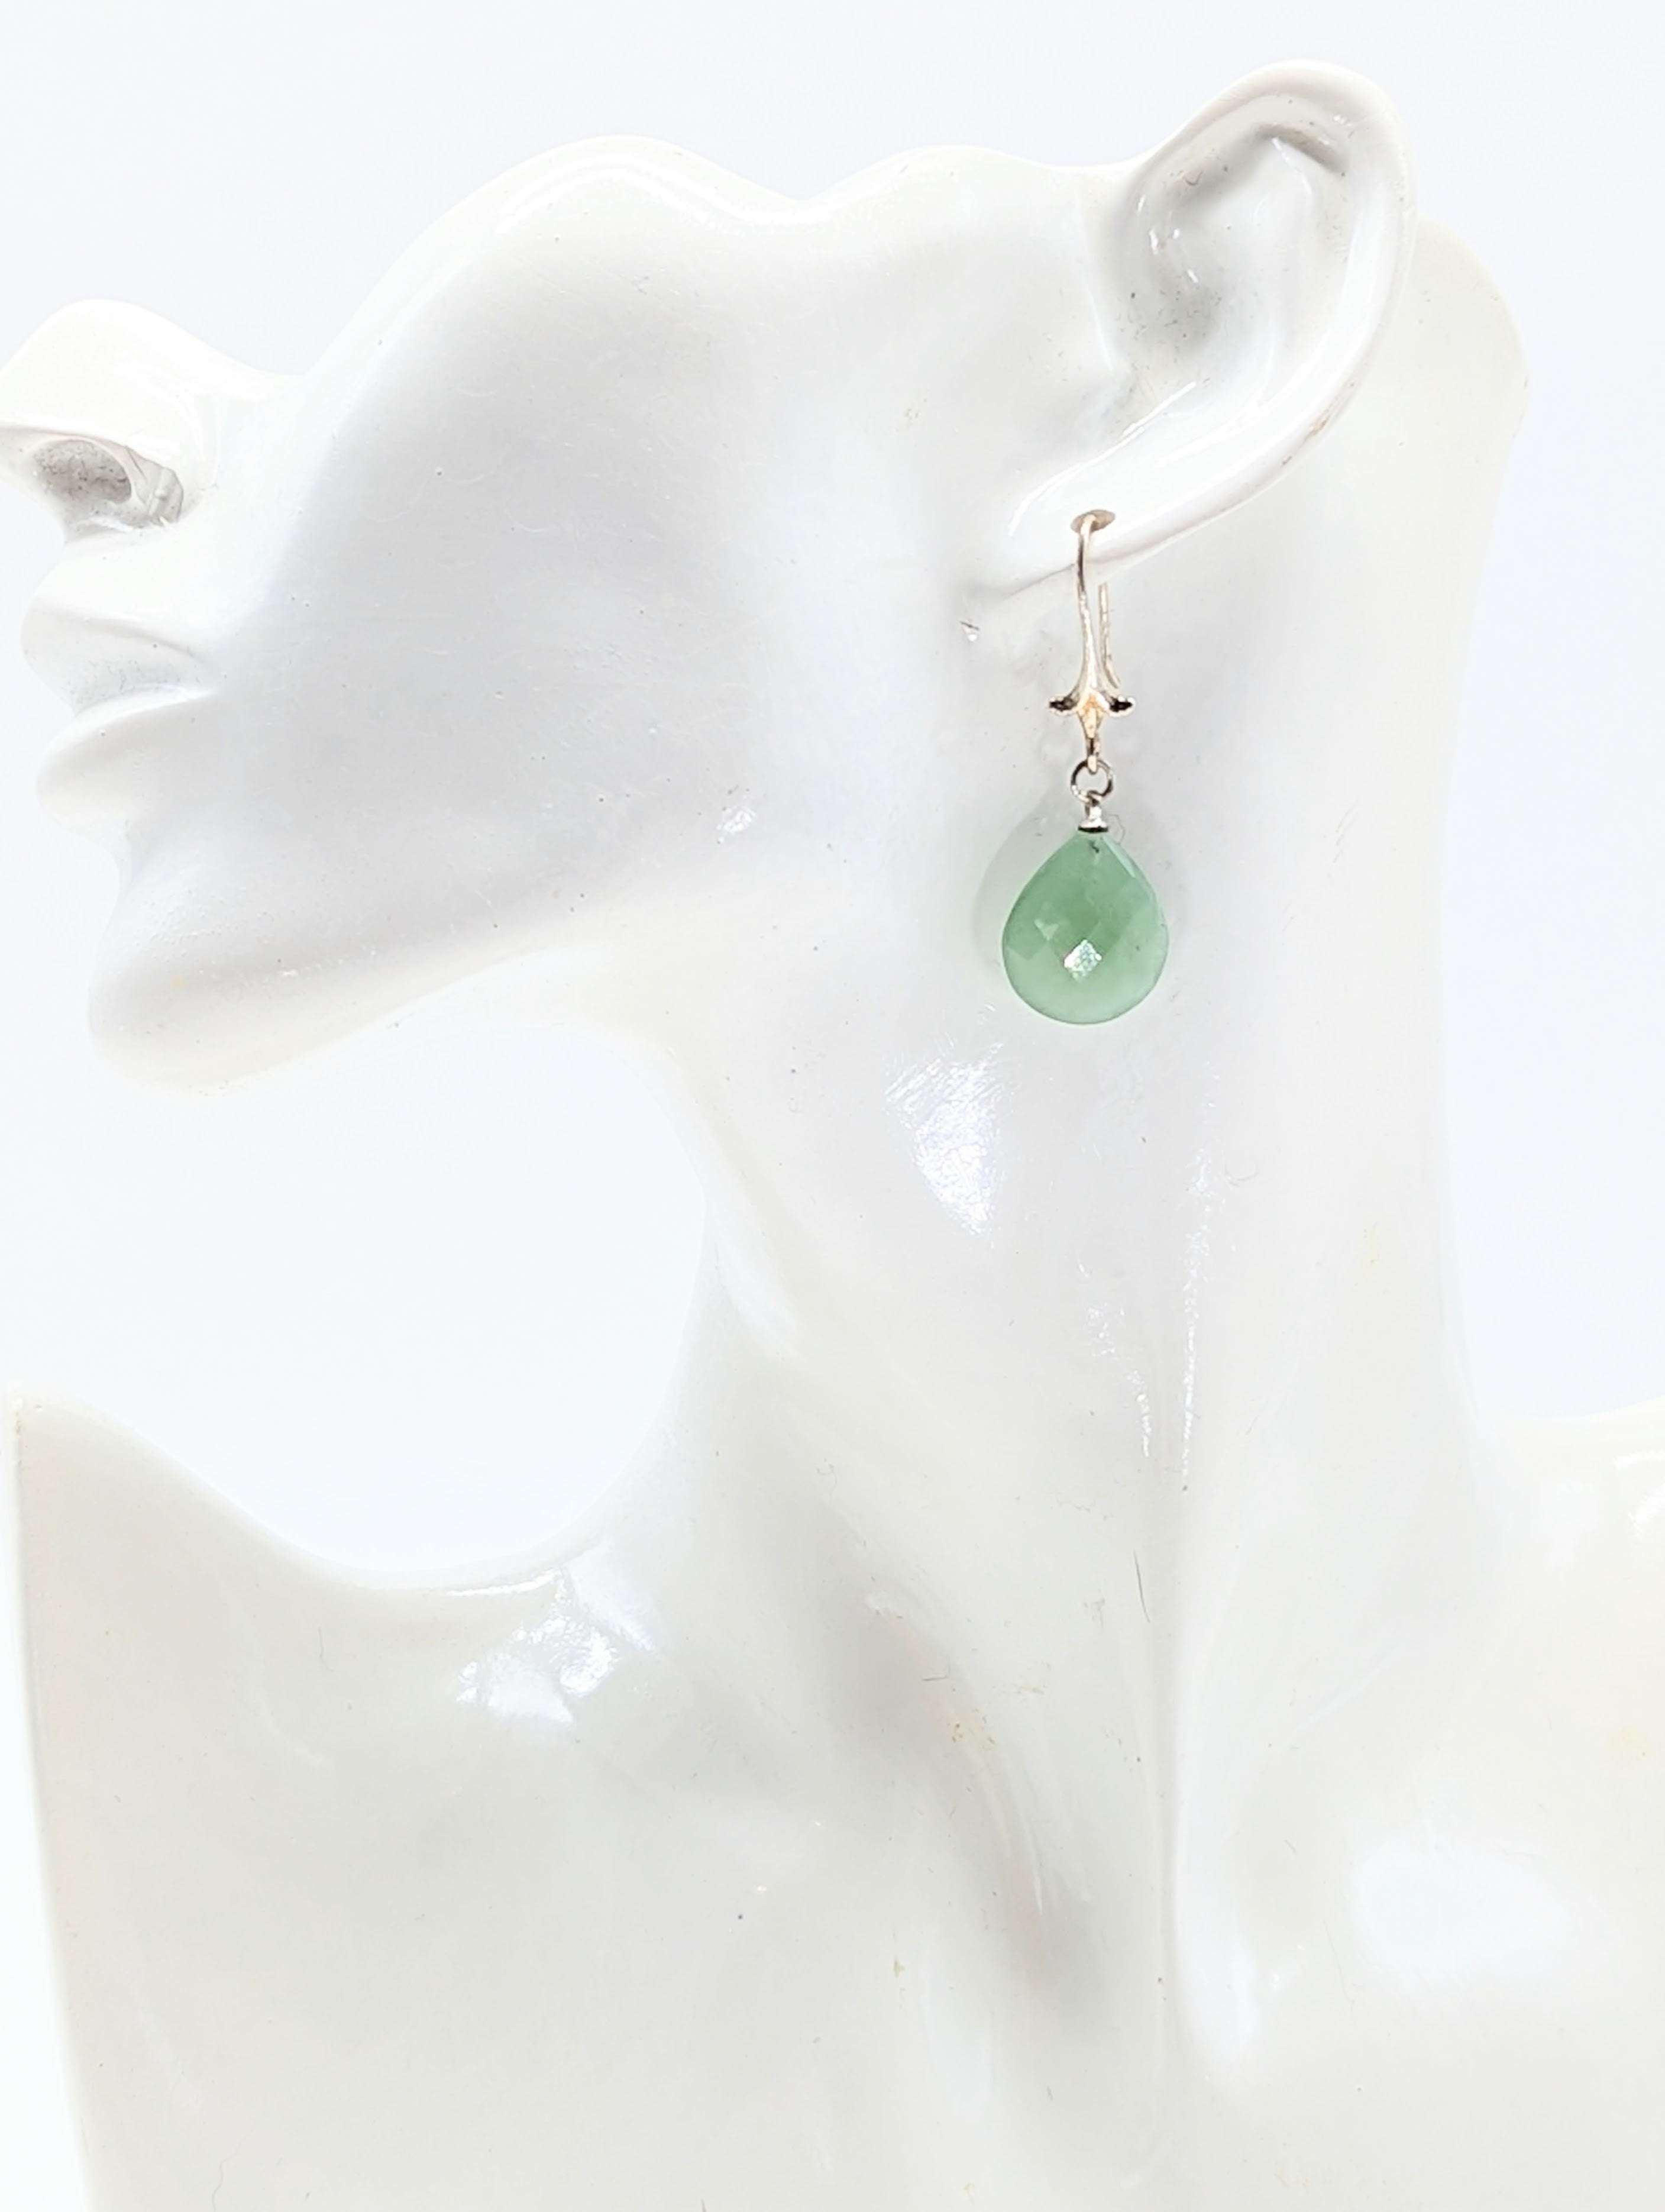 Aventurine Briolette and Sterling Silver Lily Dangle Earrings - The Caffeinated Raven